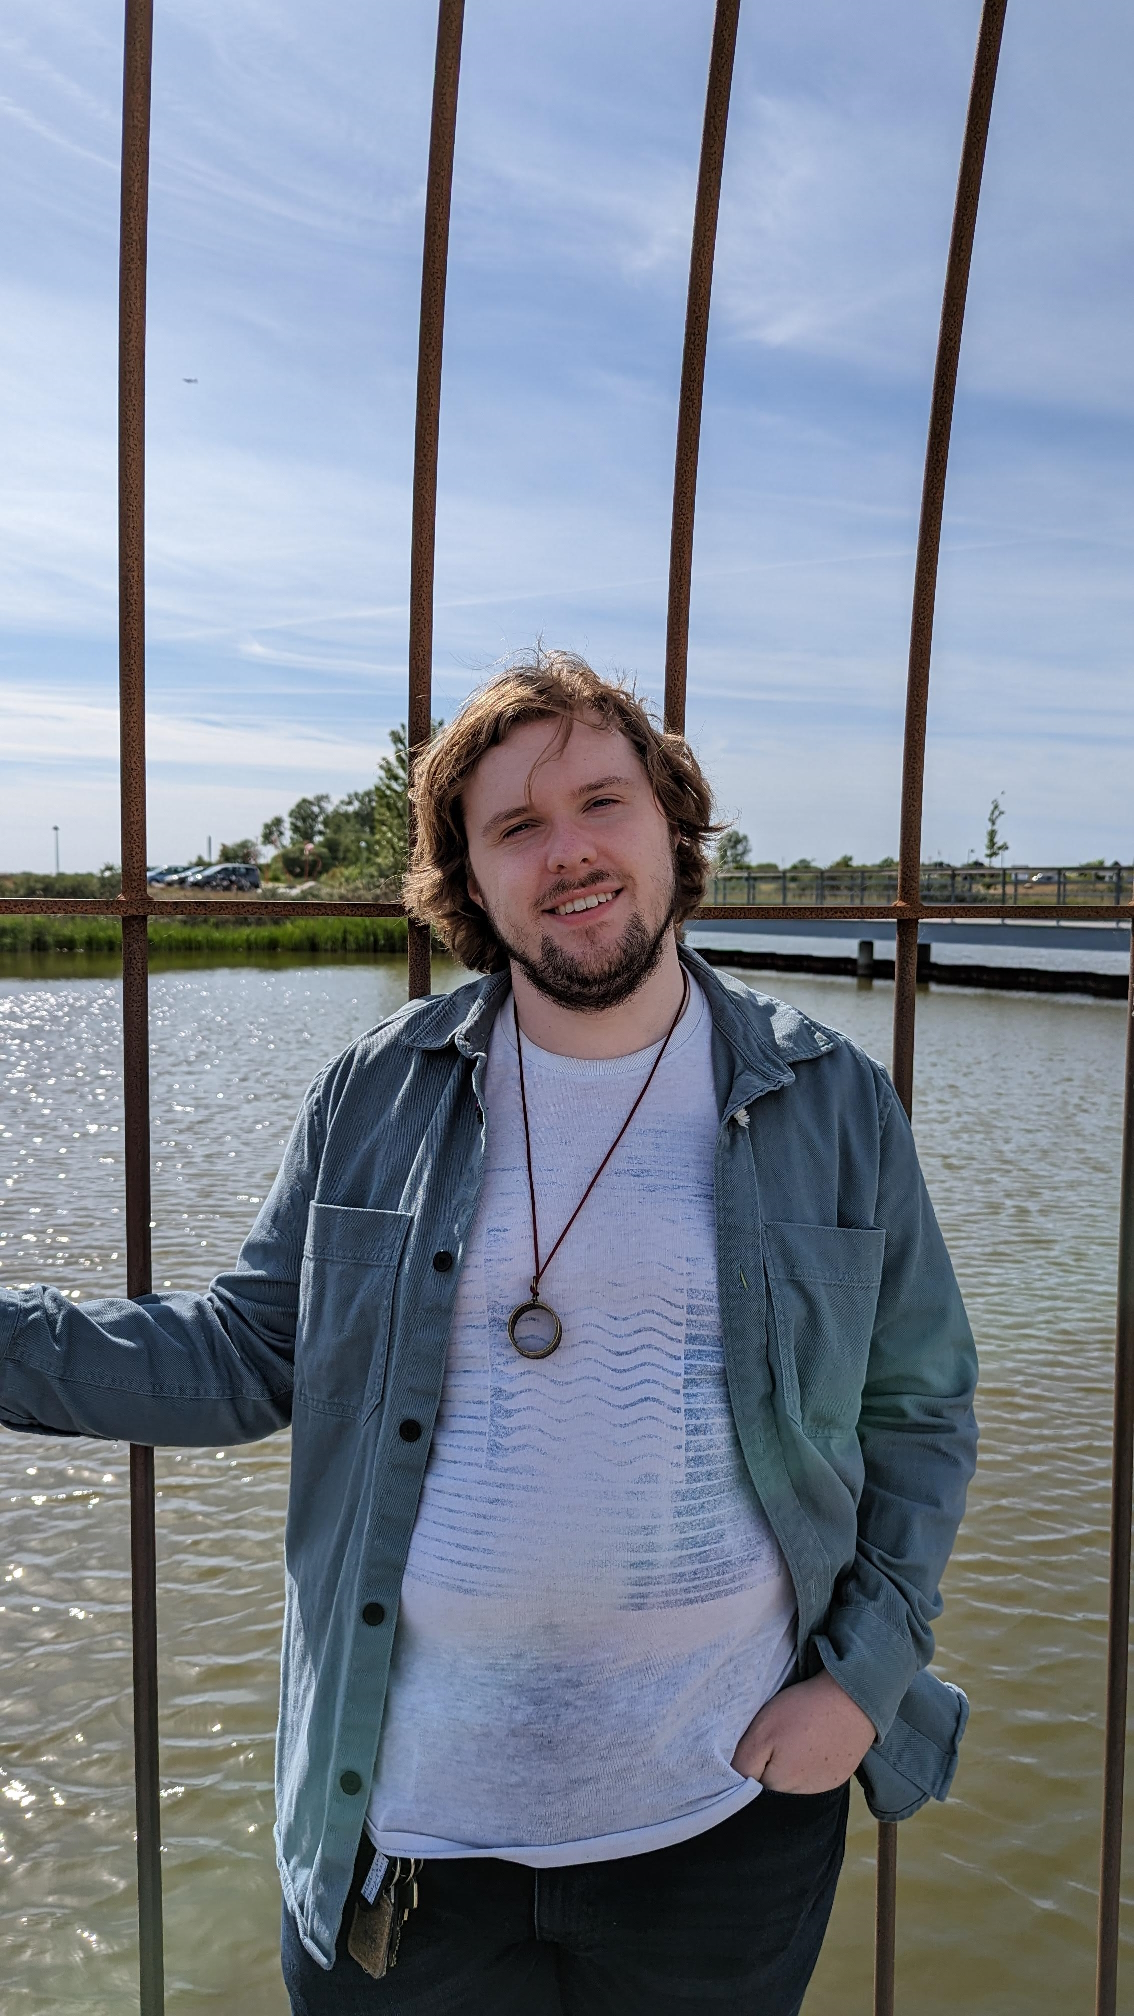 Me, standing in front of some metal bars, with water and sky in the background